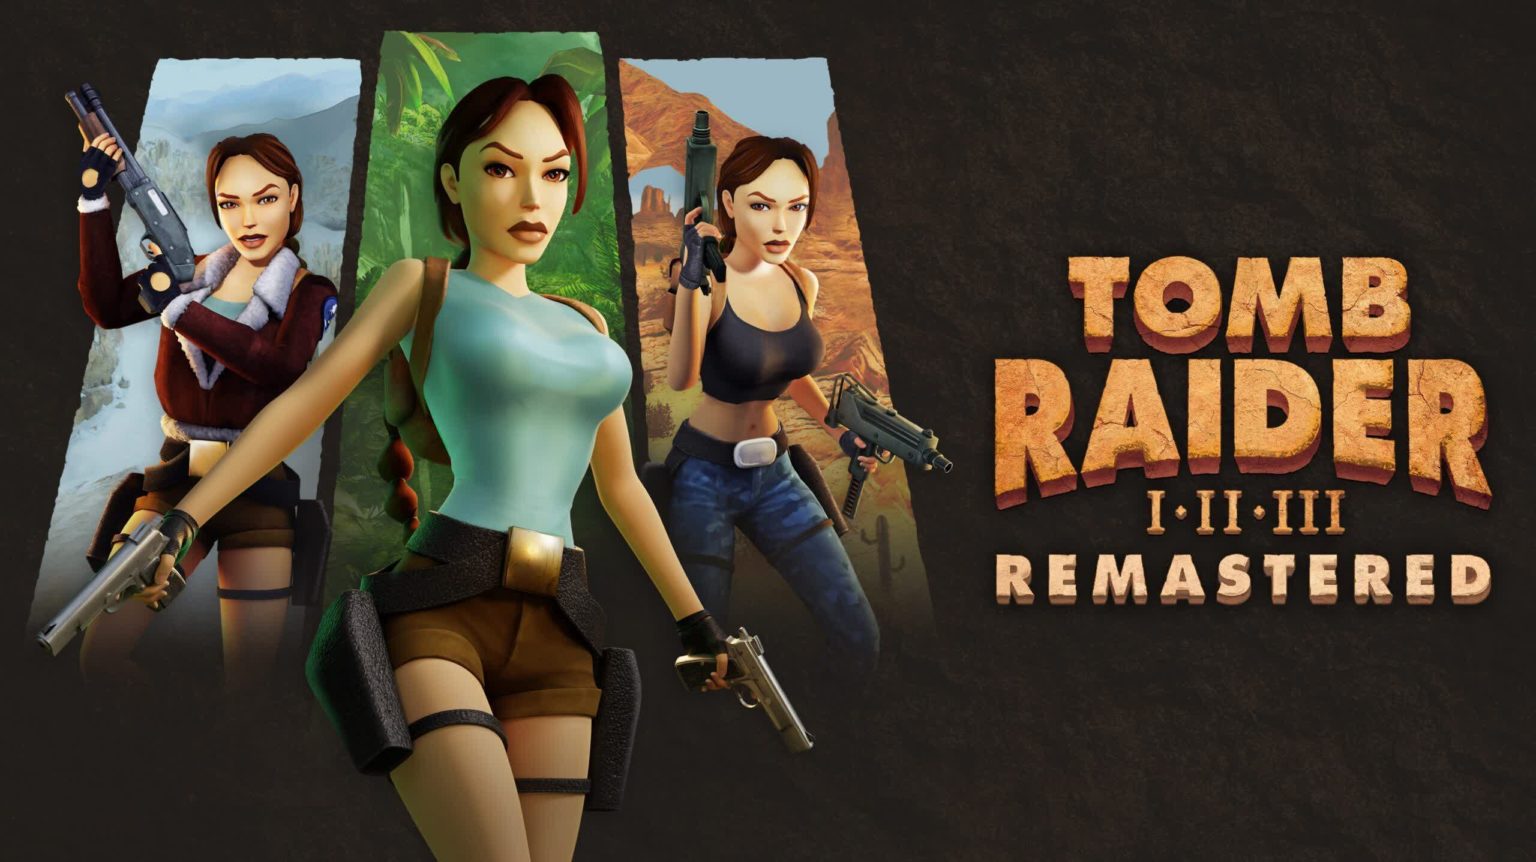 Tomb Raider remaster developers detail visual and gameplay updates ahead of launch